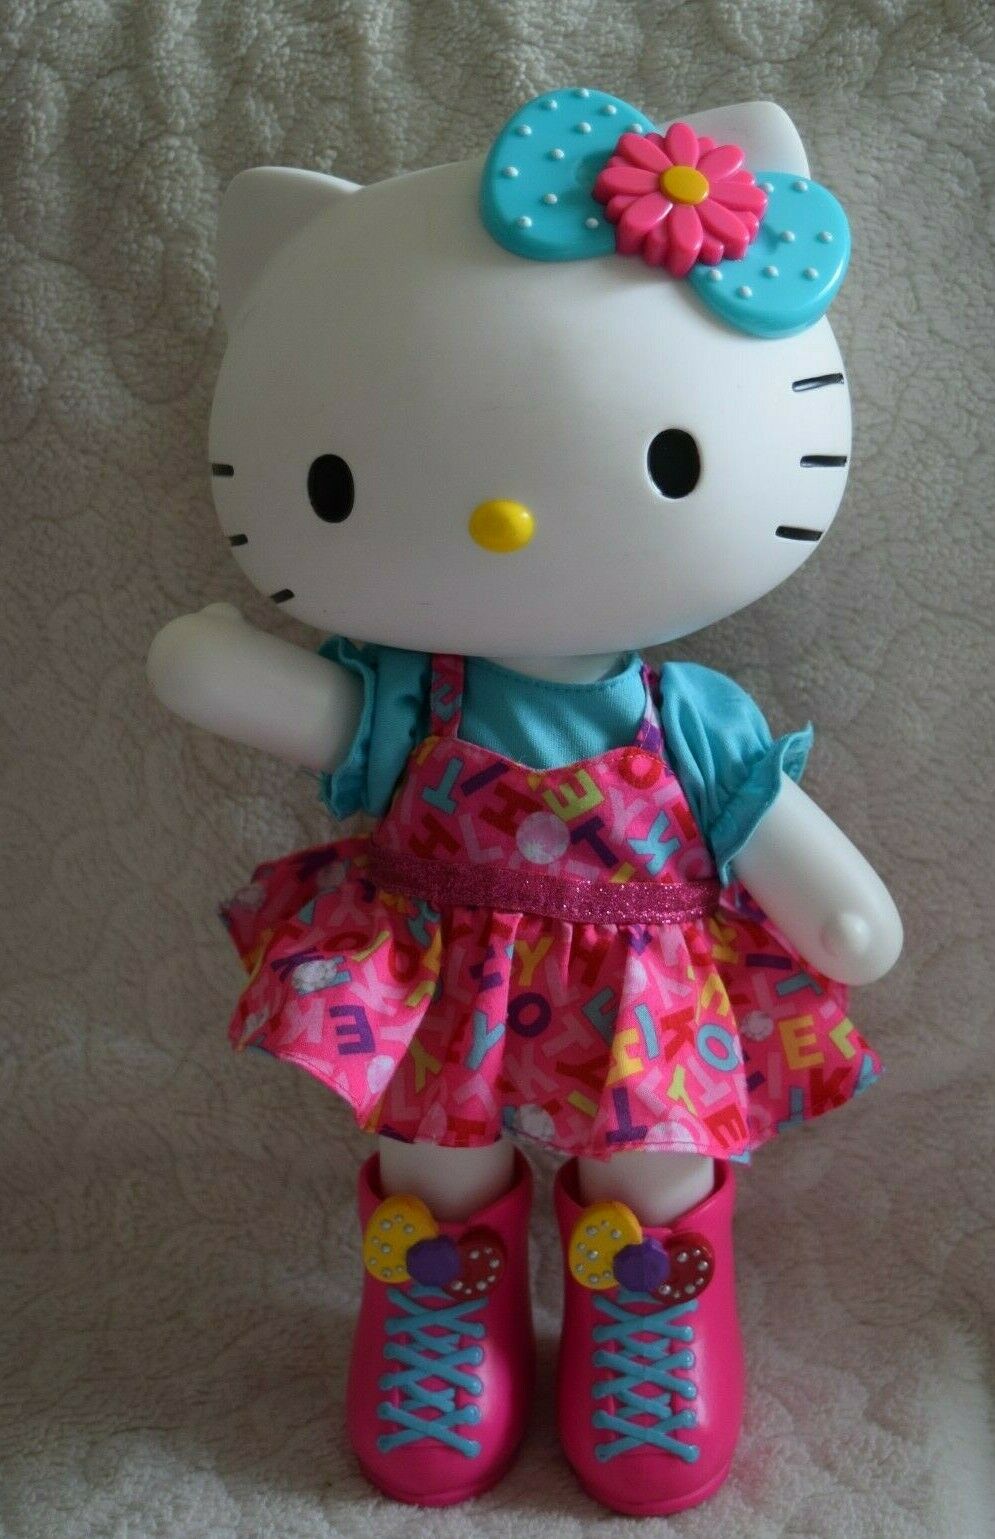 Blip Toys Hello Kitty 13 Inch Posable Doll With Dress And Shoes 2013